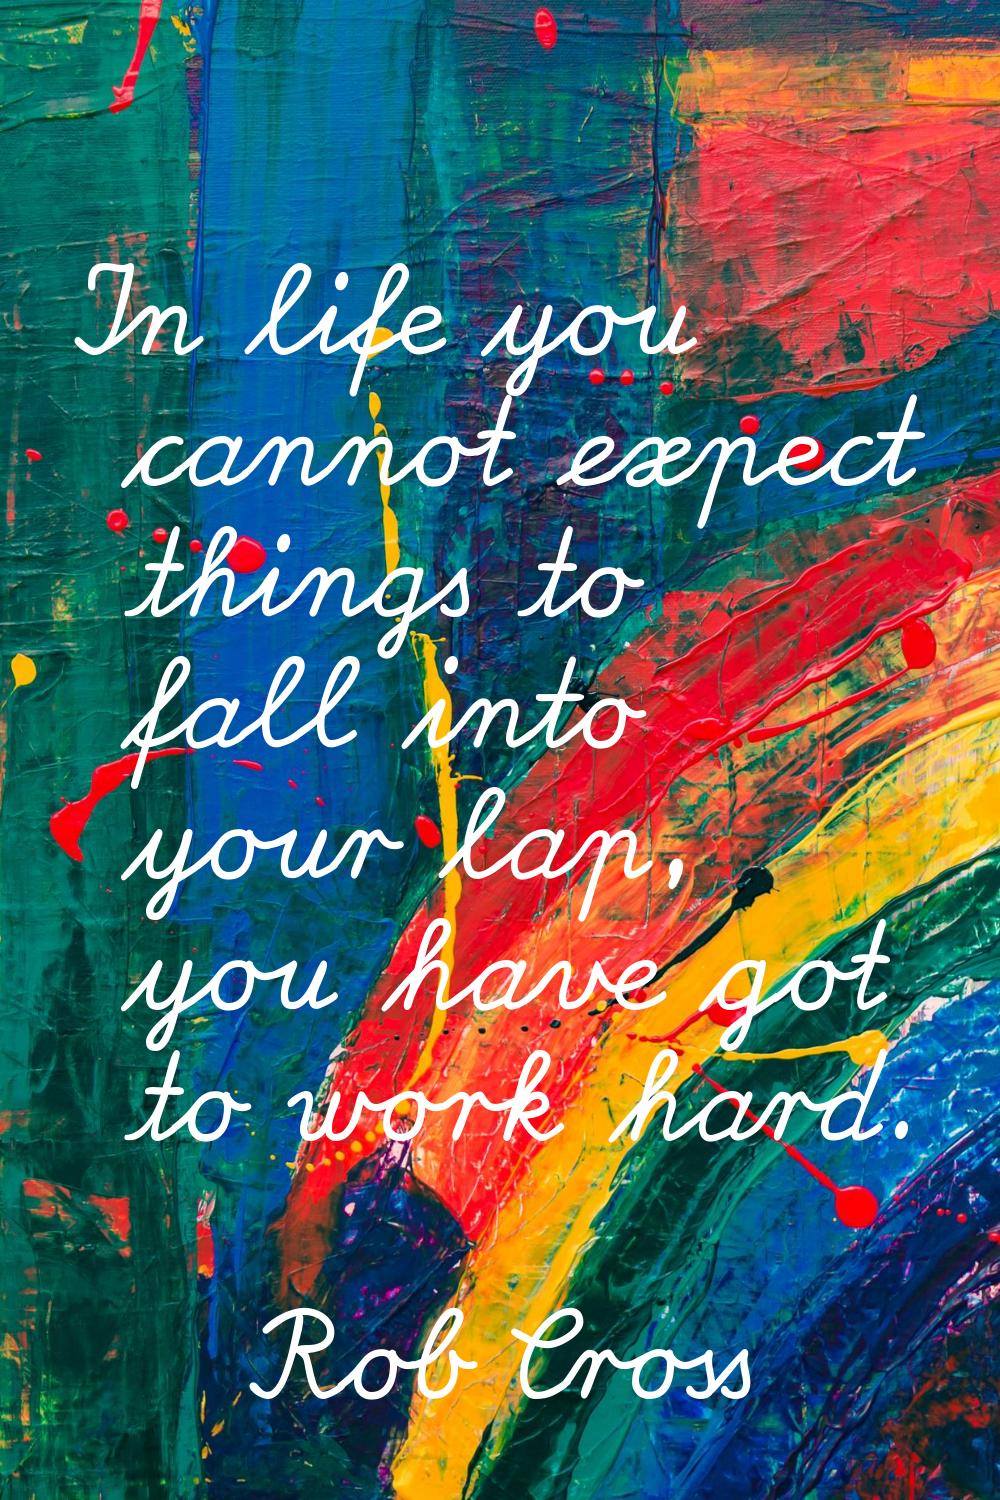 In life you cannot expect things to fall into your lap, you have got to work hard.